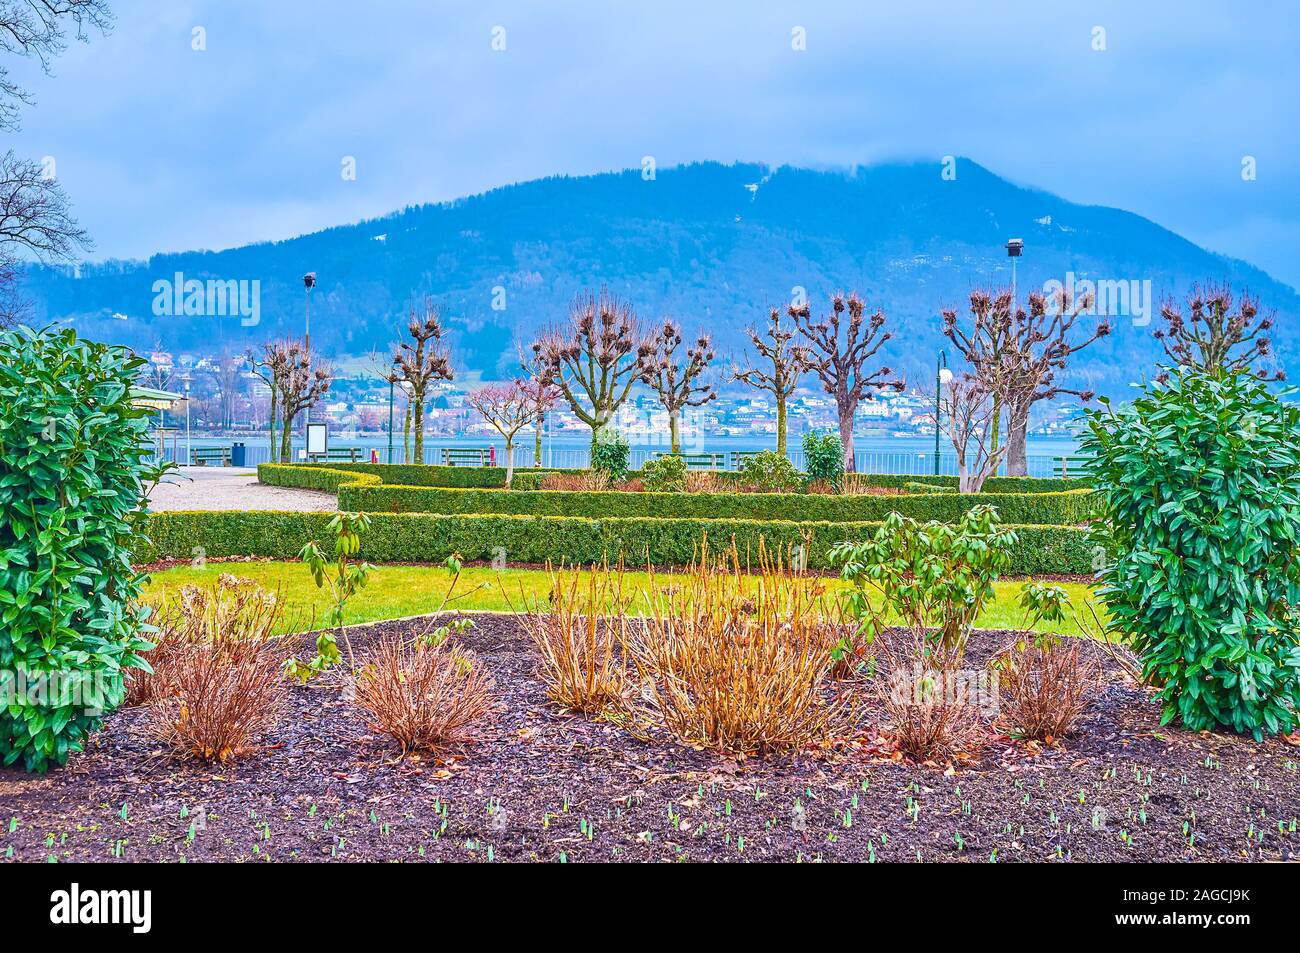 The scenic plants in Kurpark during winter rainy days and the mist on the top of the mountain on the background, Gmunden, Austria Stock Photo